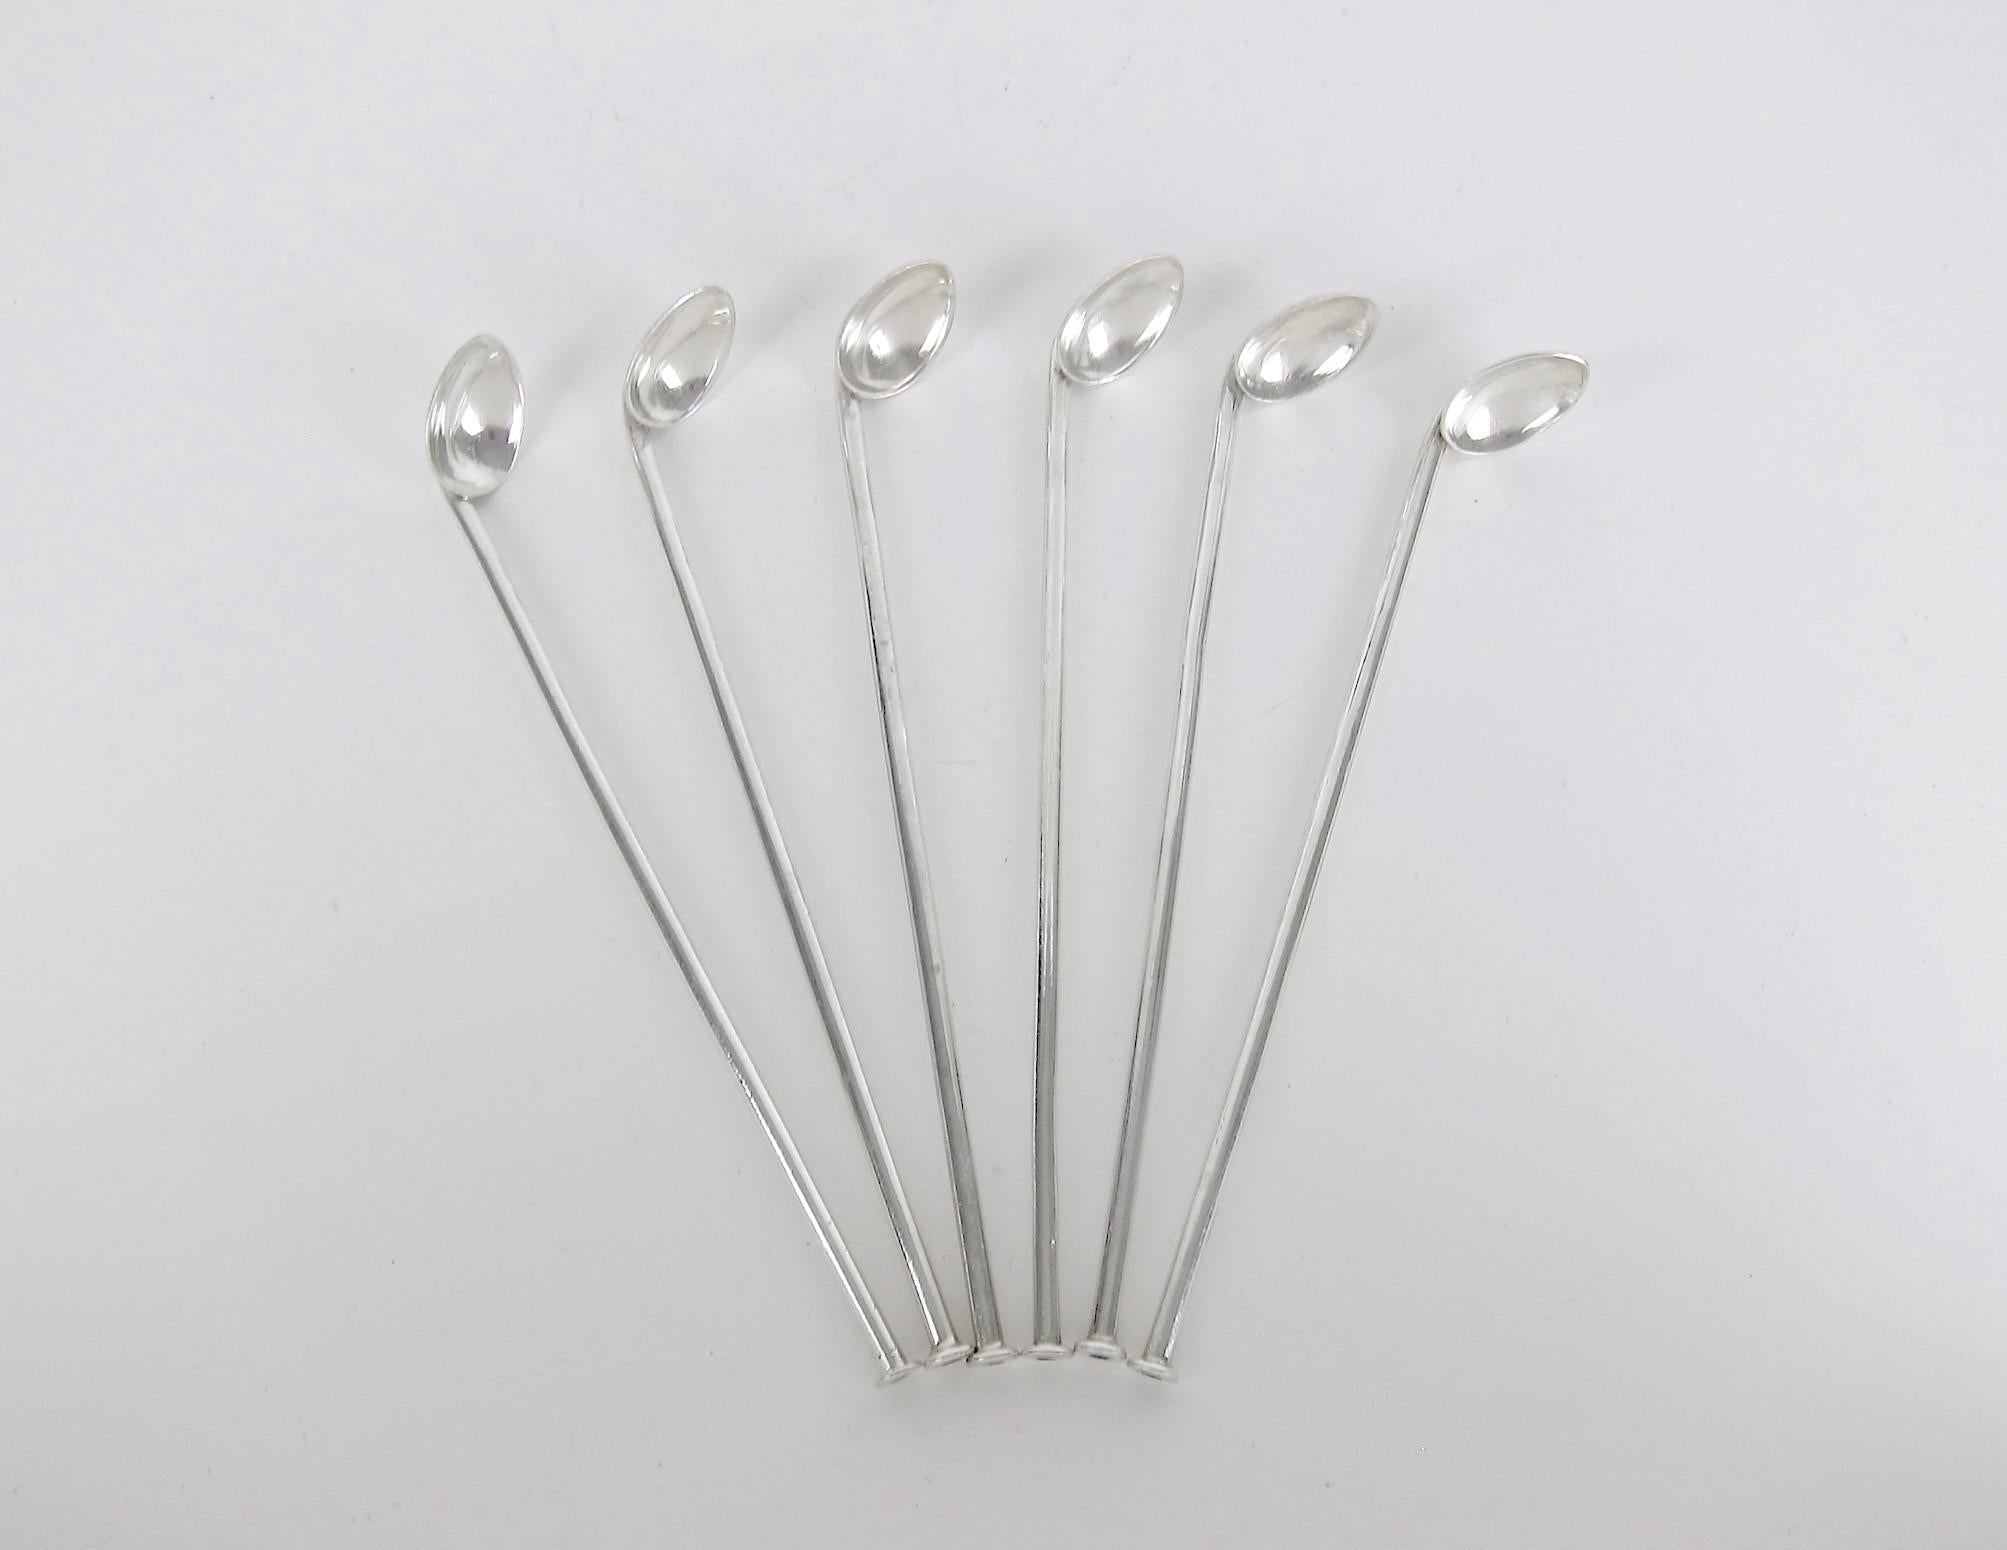 A vintage set of six iced tea or mint julep sipper spoons from the collection and estate of Peggy and David Rockefeller. The sterling silver spoons have long, hollow handles creating drinking straws for any cold beverage or cocktail served in a